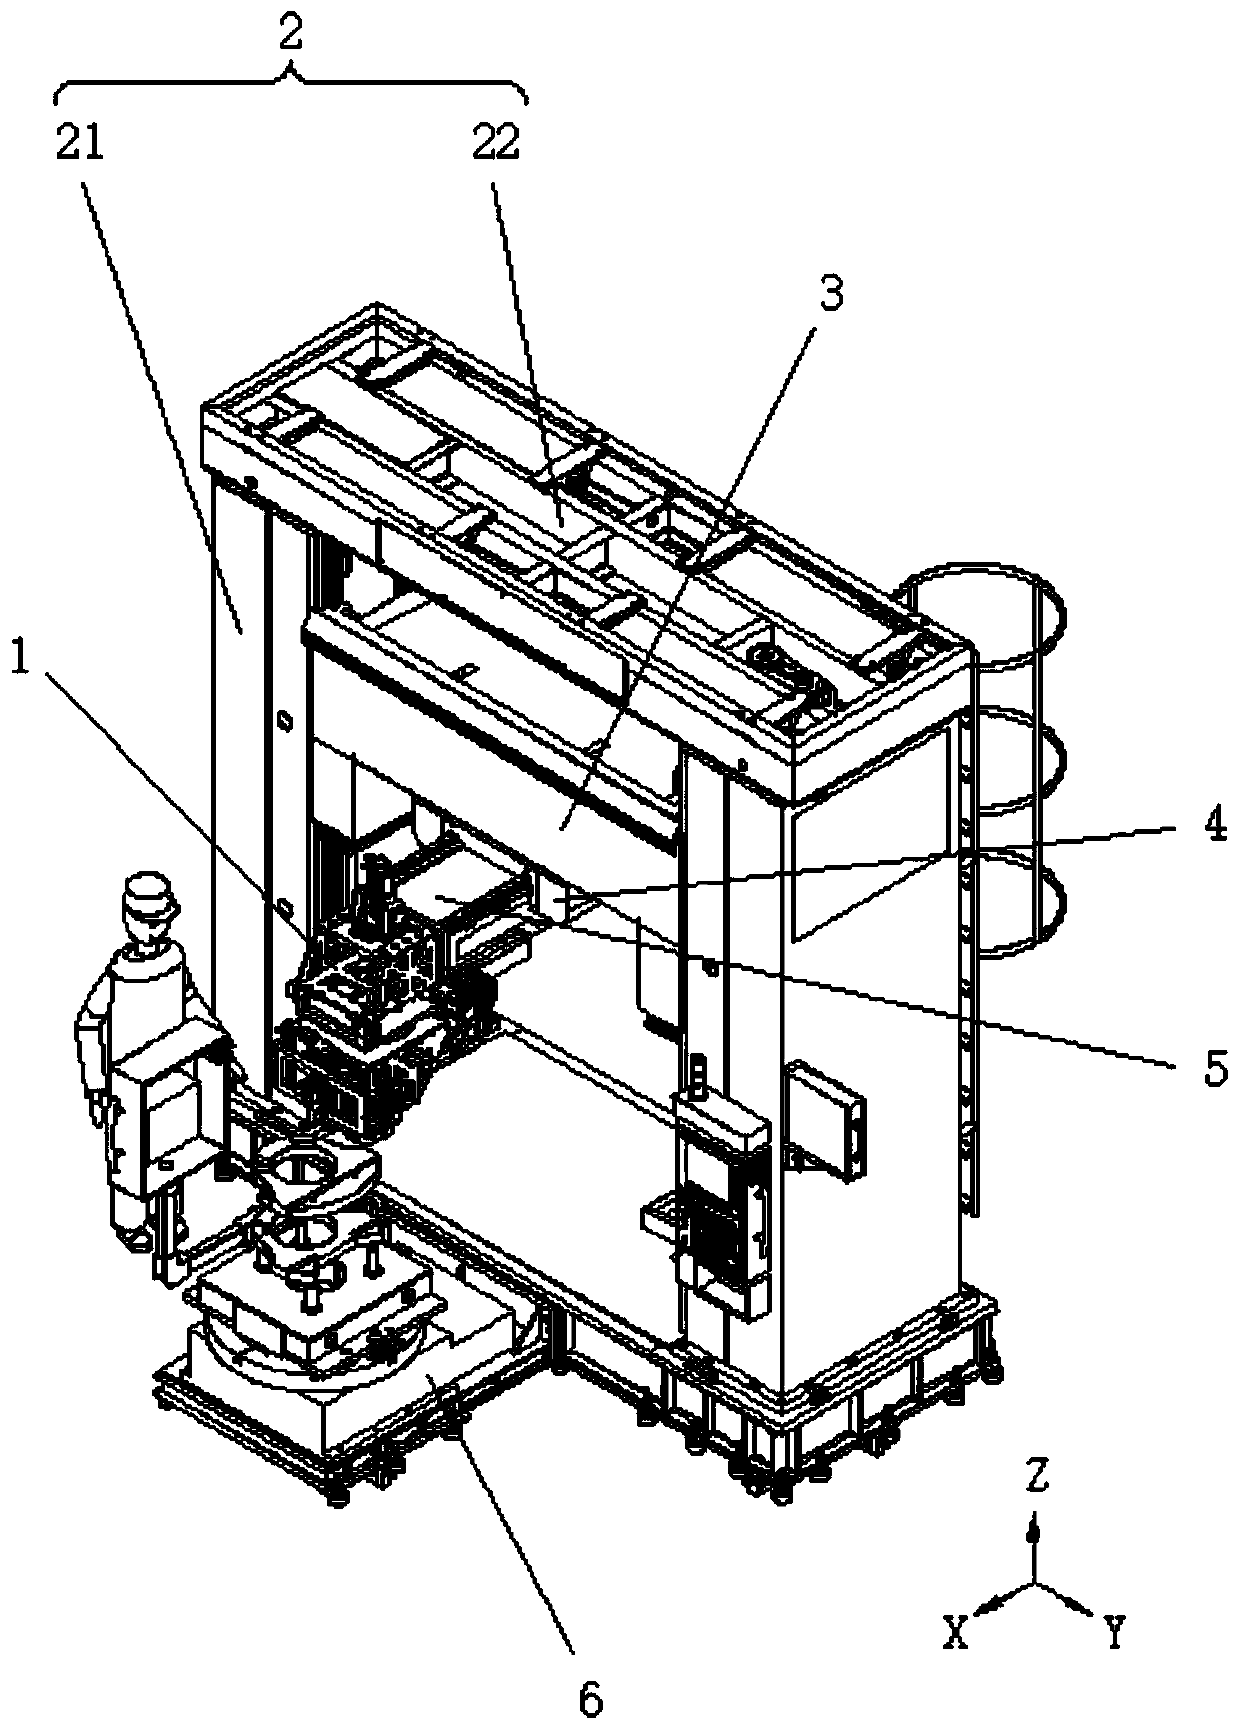 Drilling-riveting machine tool used for aircraft hull manufacturing